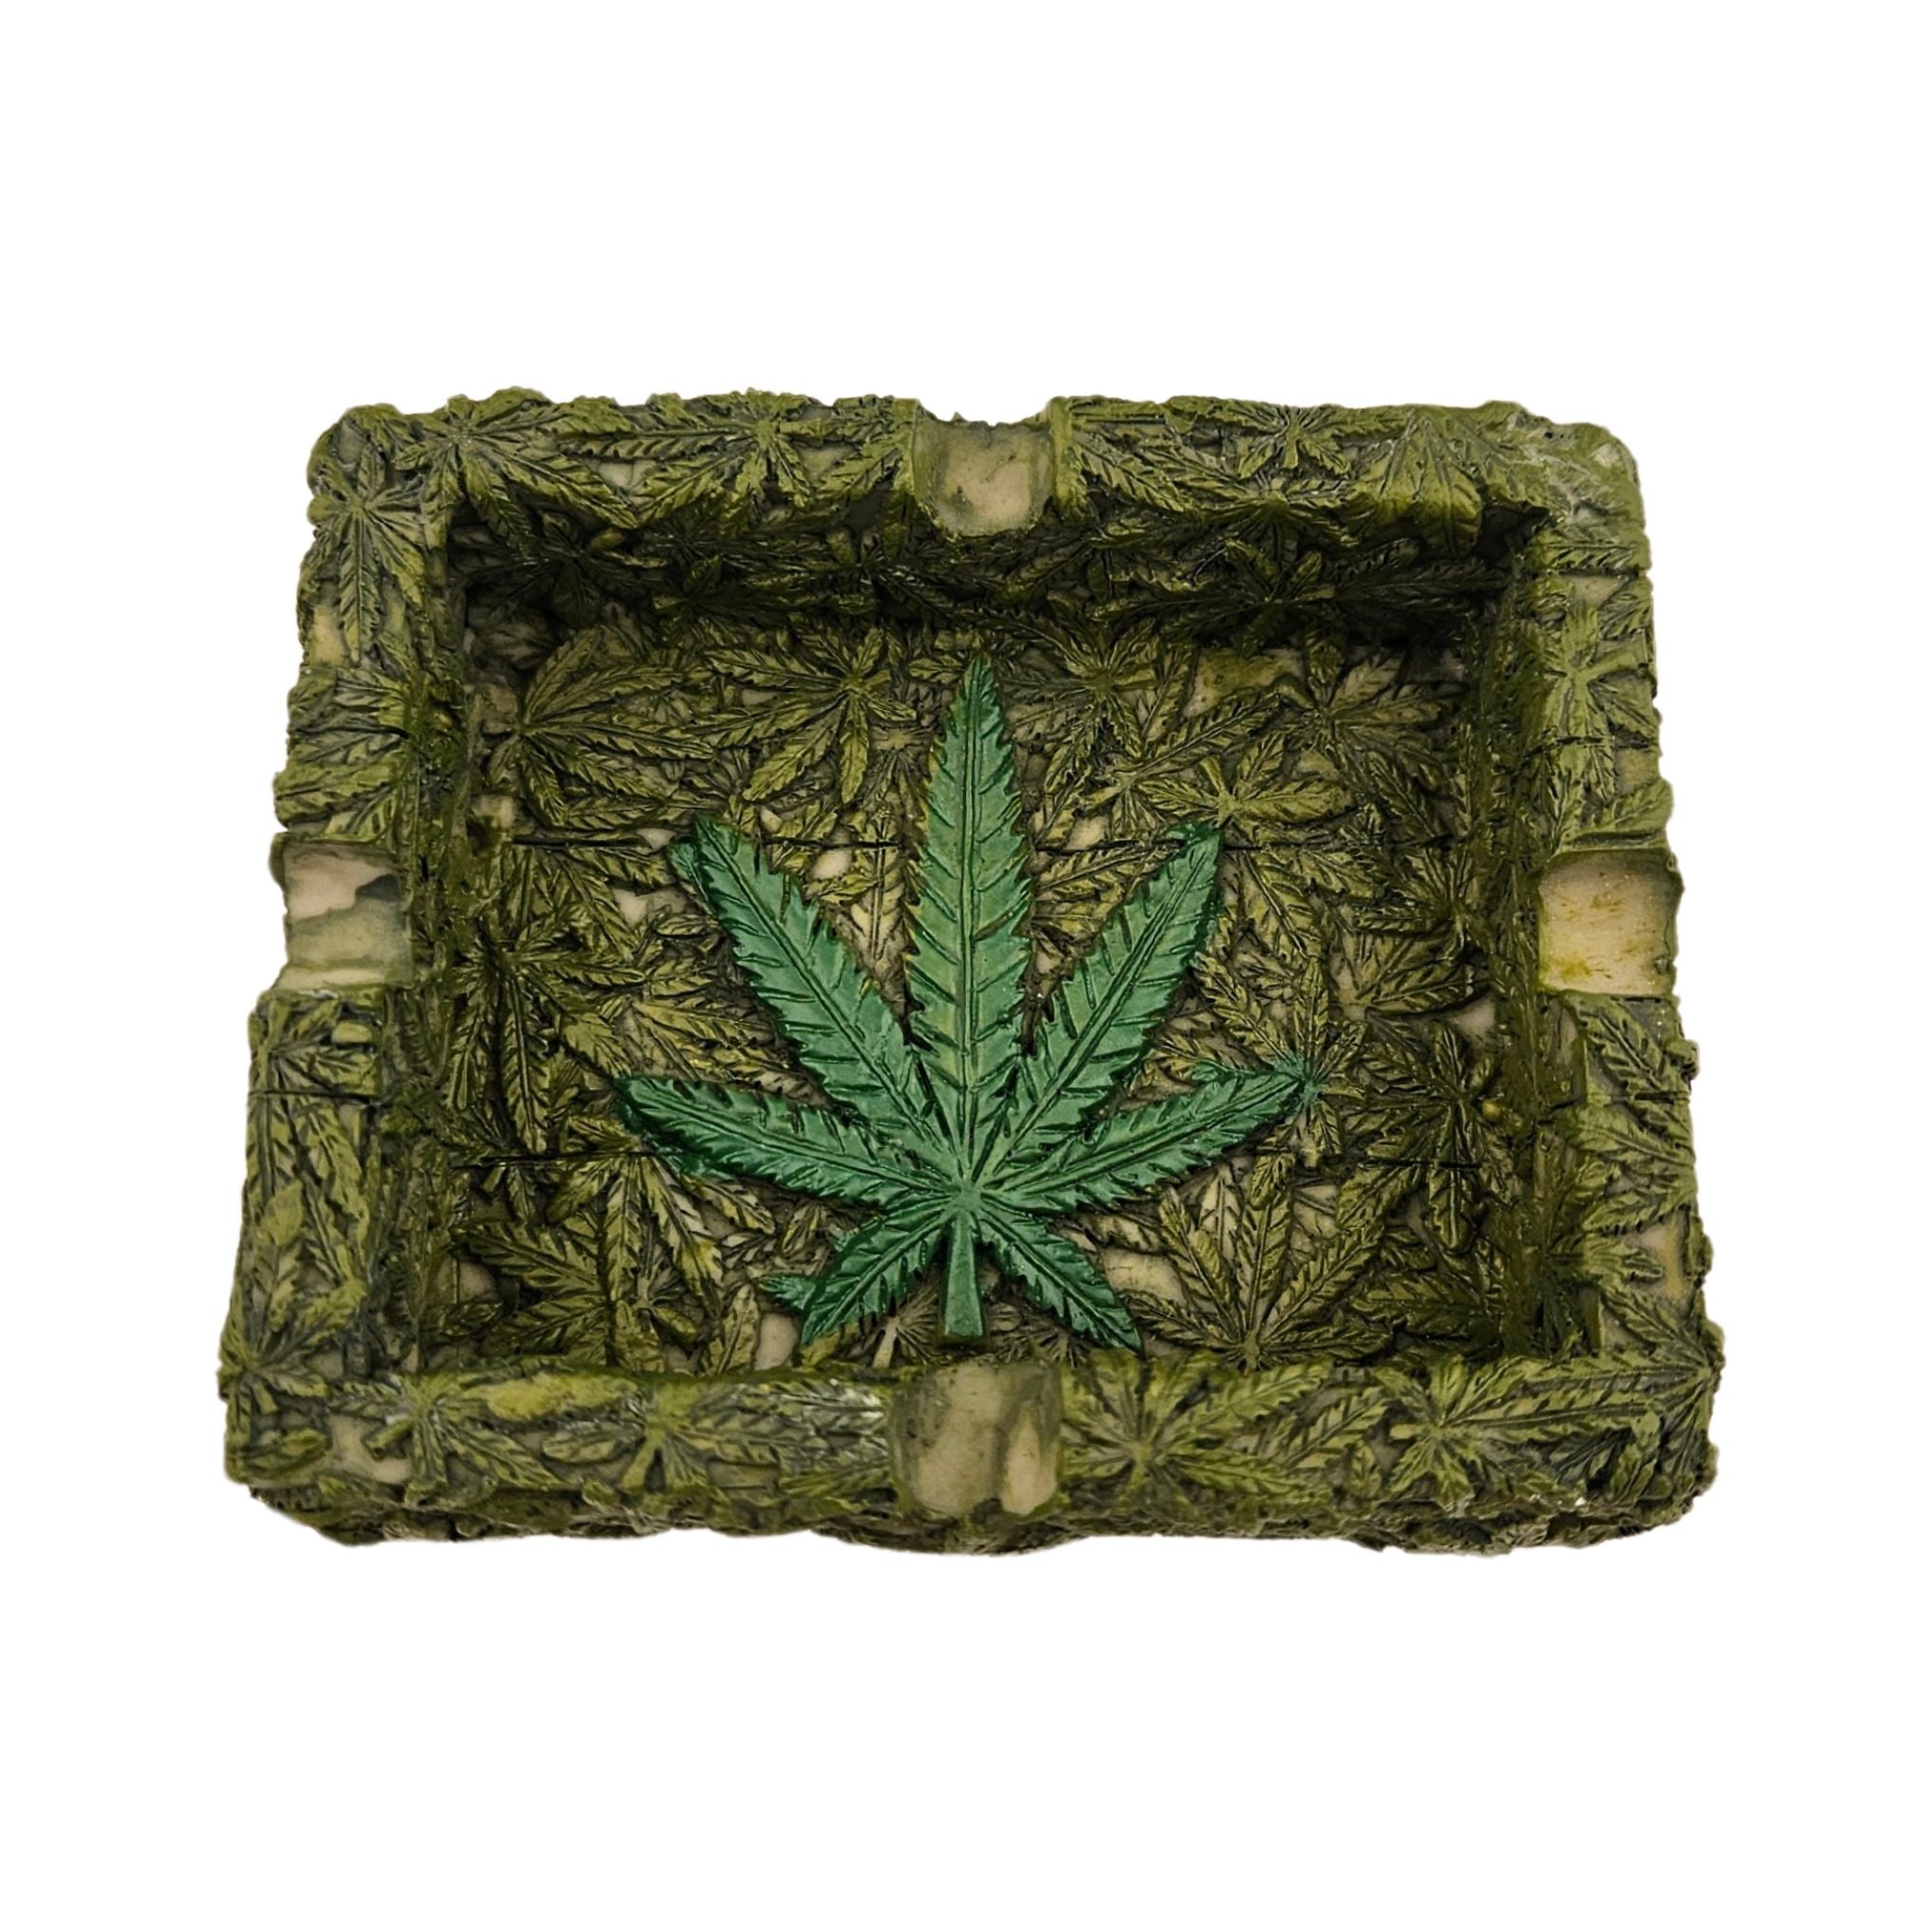 Square green ashtray with weed leaf design